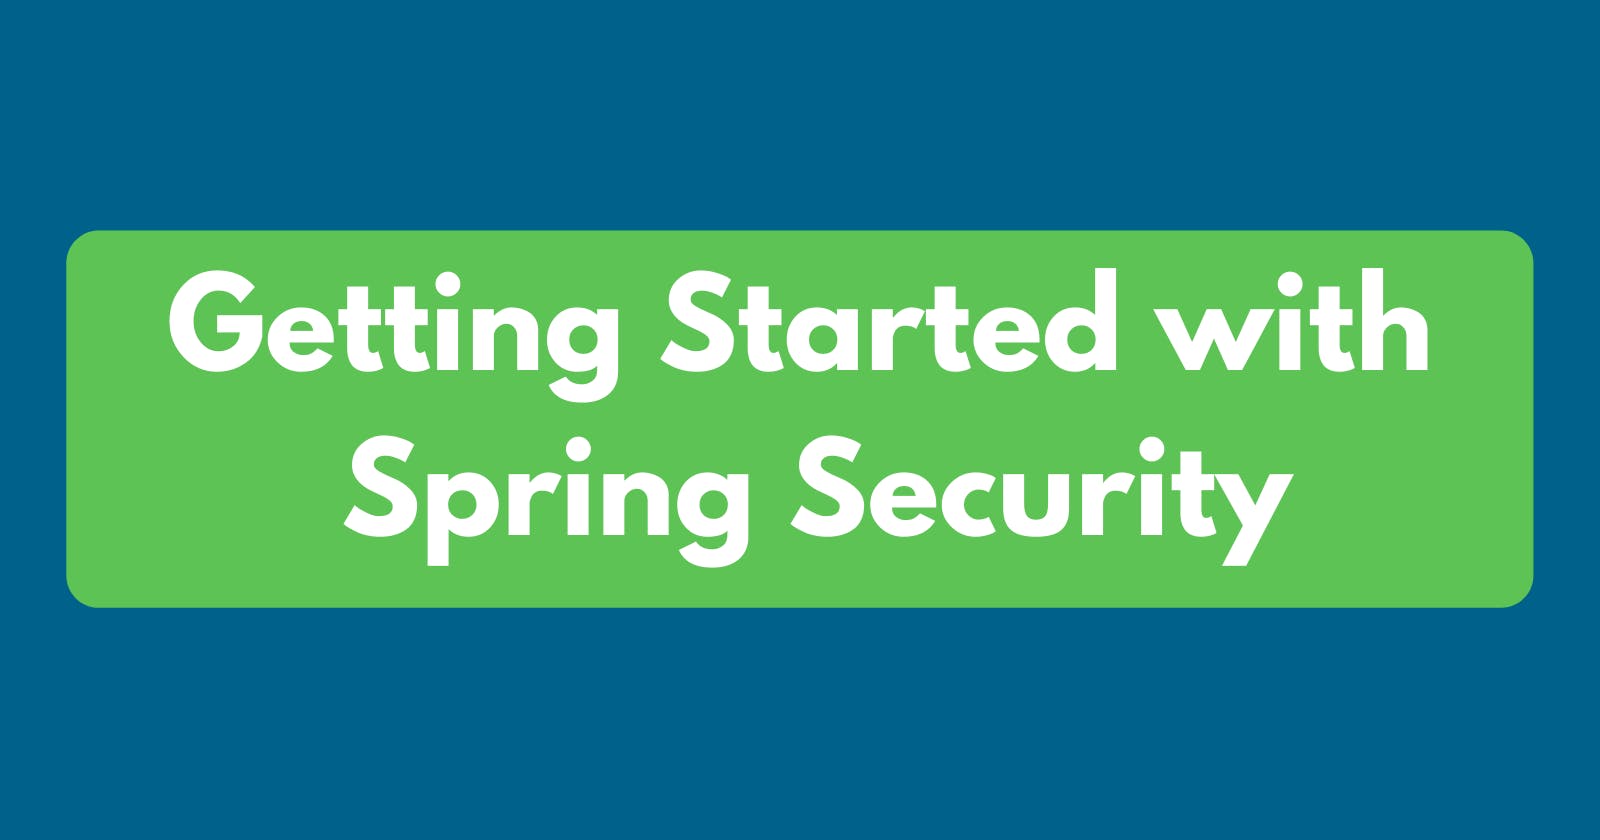 Getting Started with Spring Security